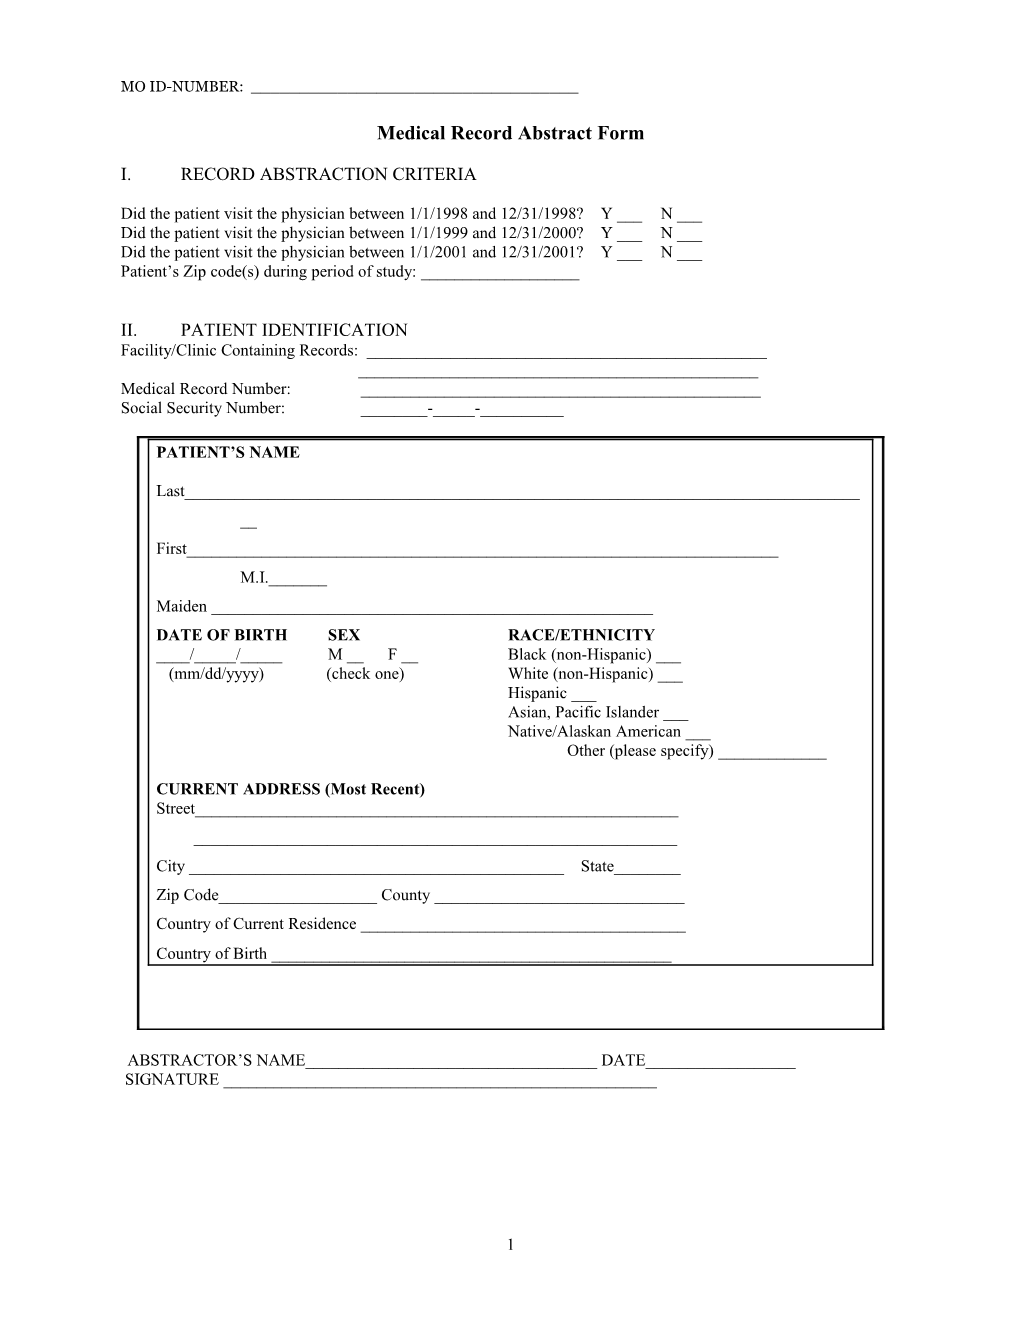 Medical Record Abstract Form